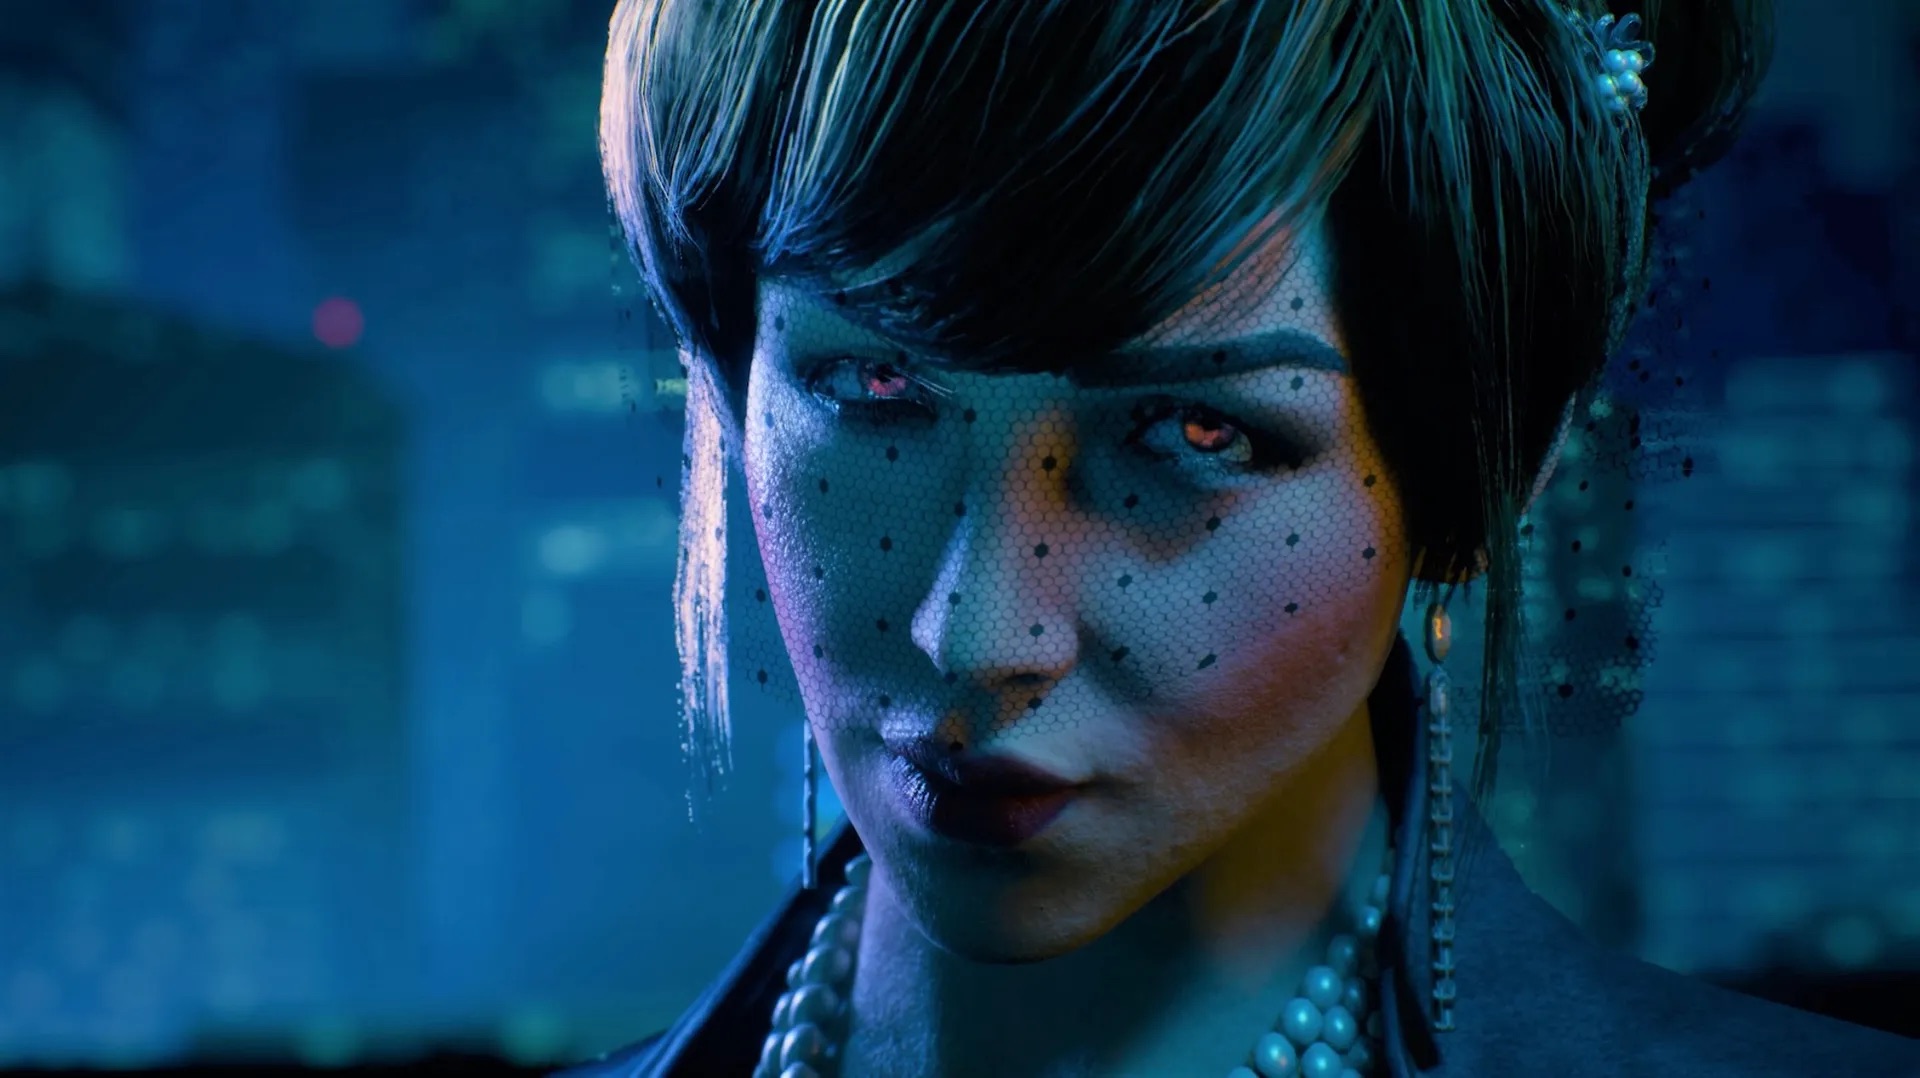 Vampire: The Masquerade - Bloodlines 2 has a new protagonist